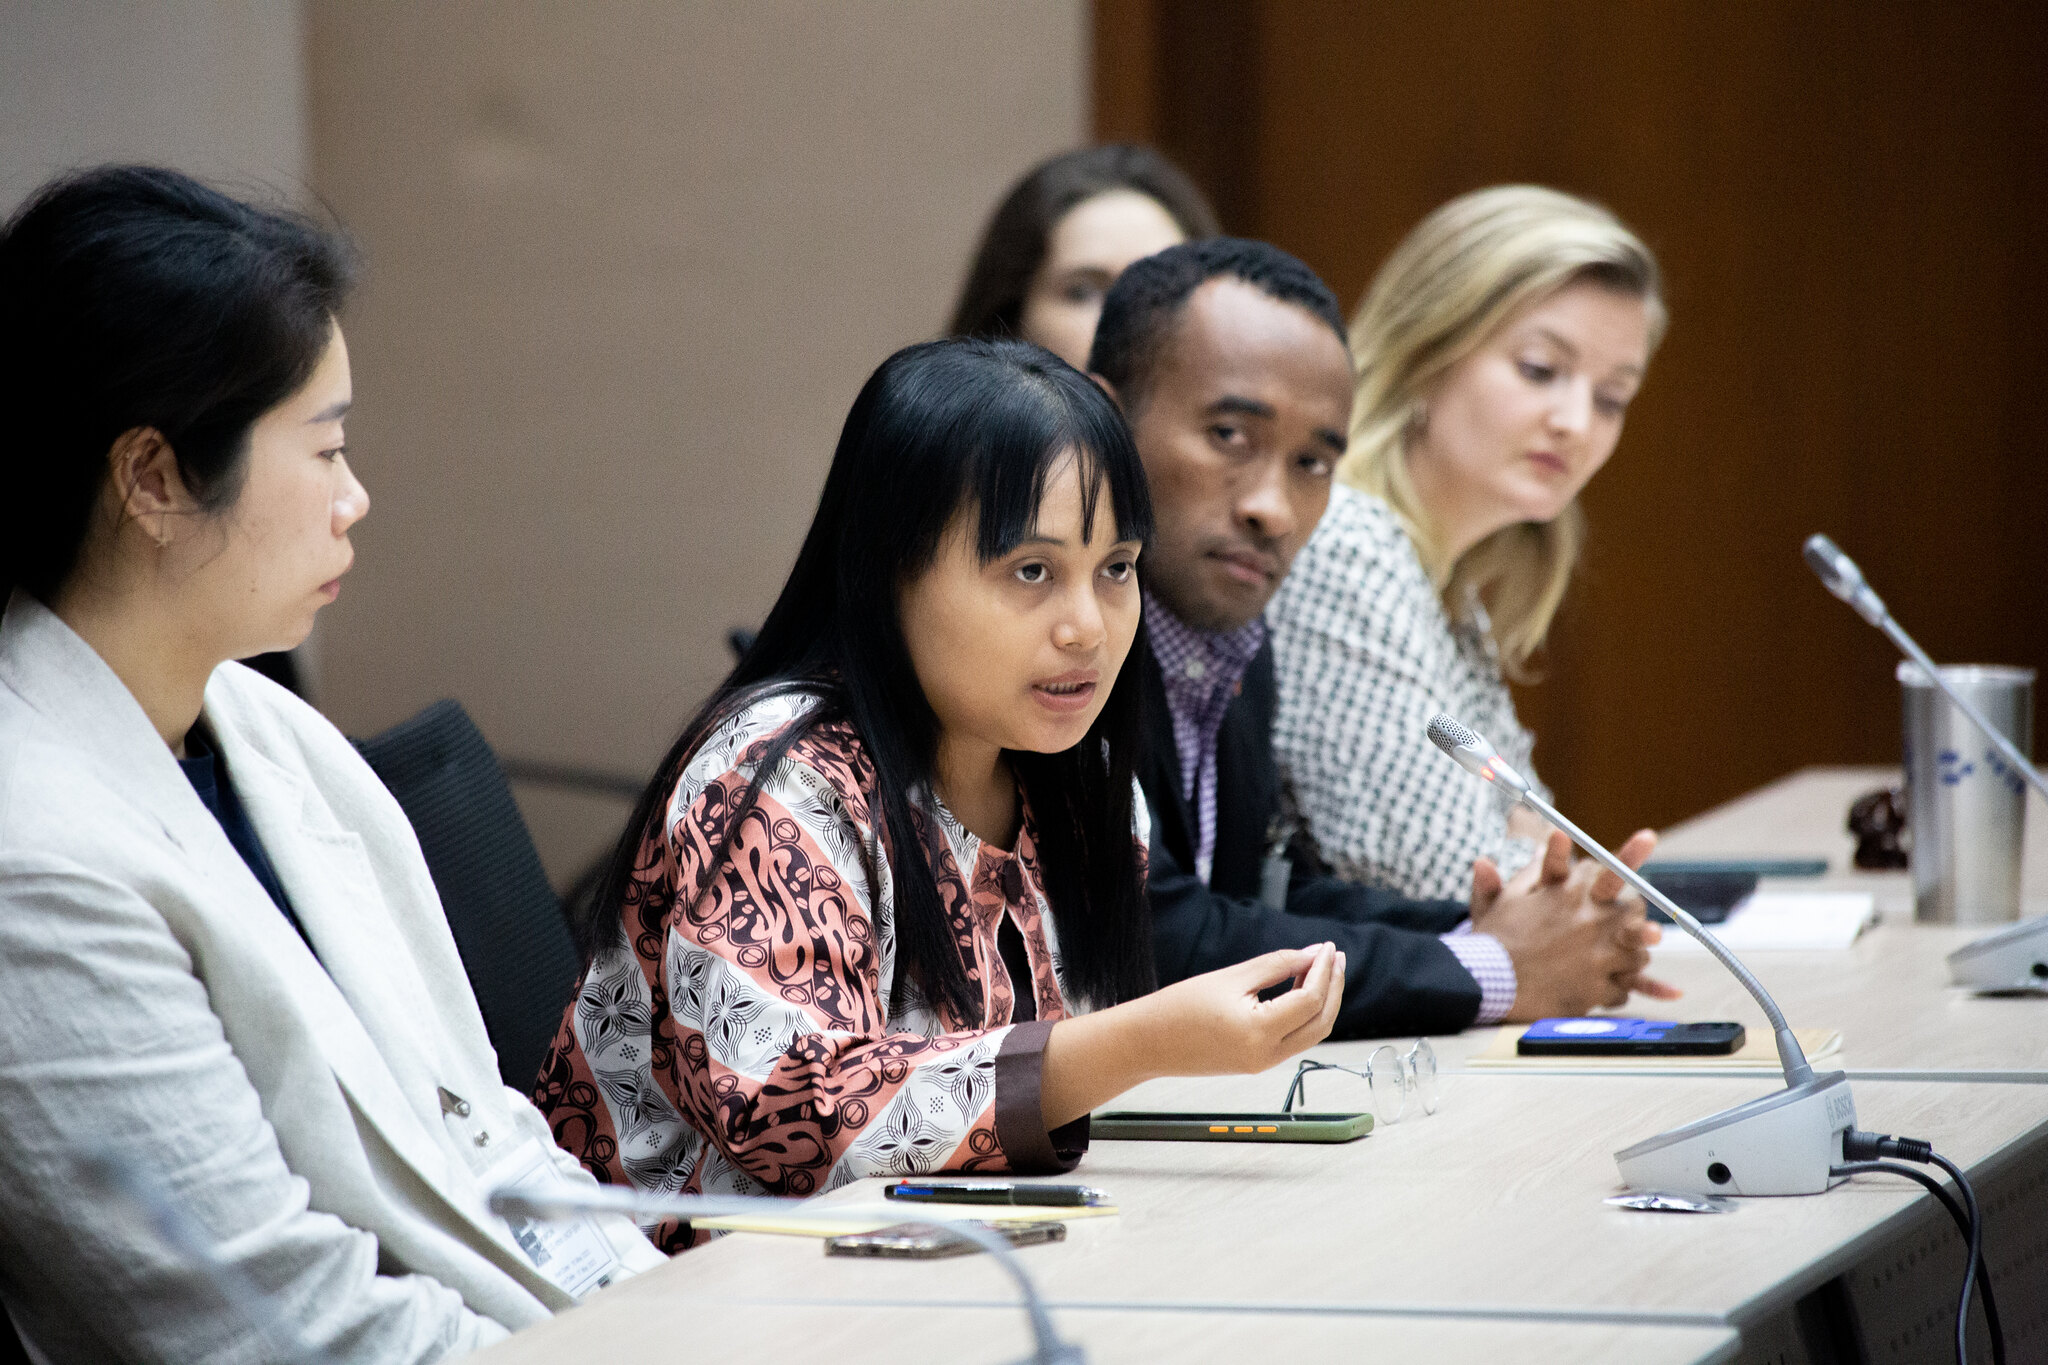  YECAP Fellow sharing her voice during the 79th session of the Commission side event on Acceleration of Climate Action: Engagement and Empowerment of Youth for the Future